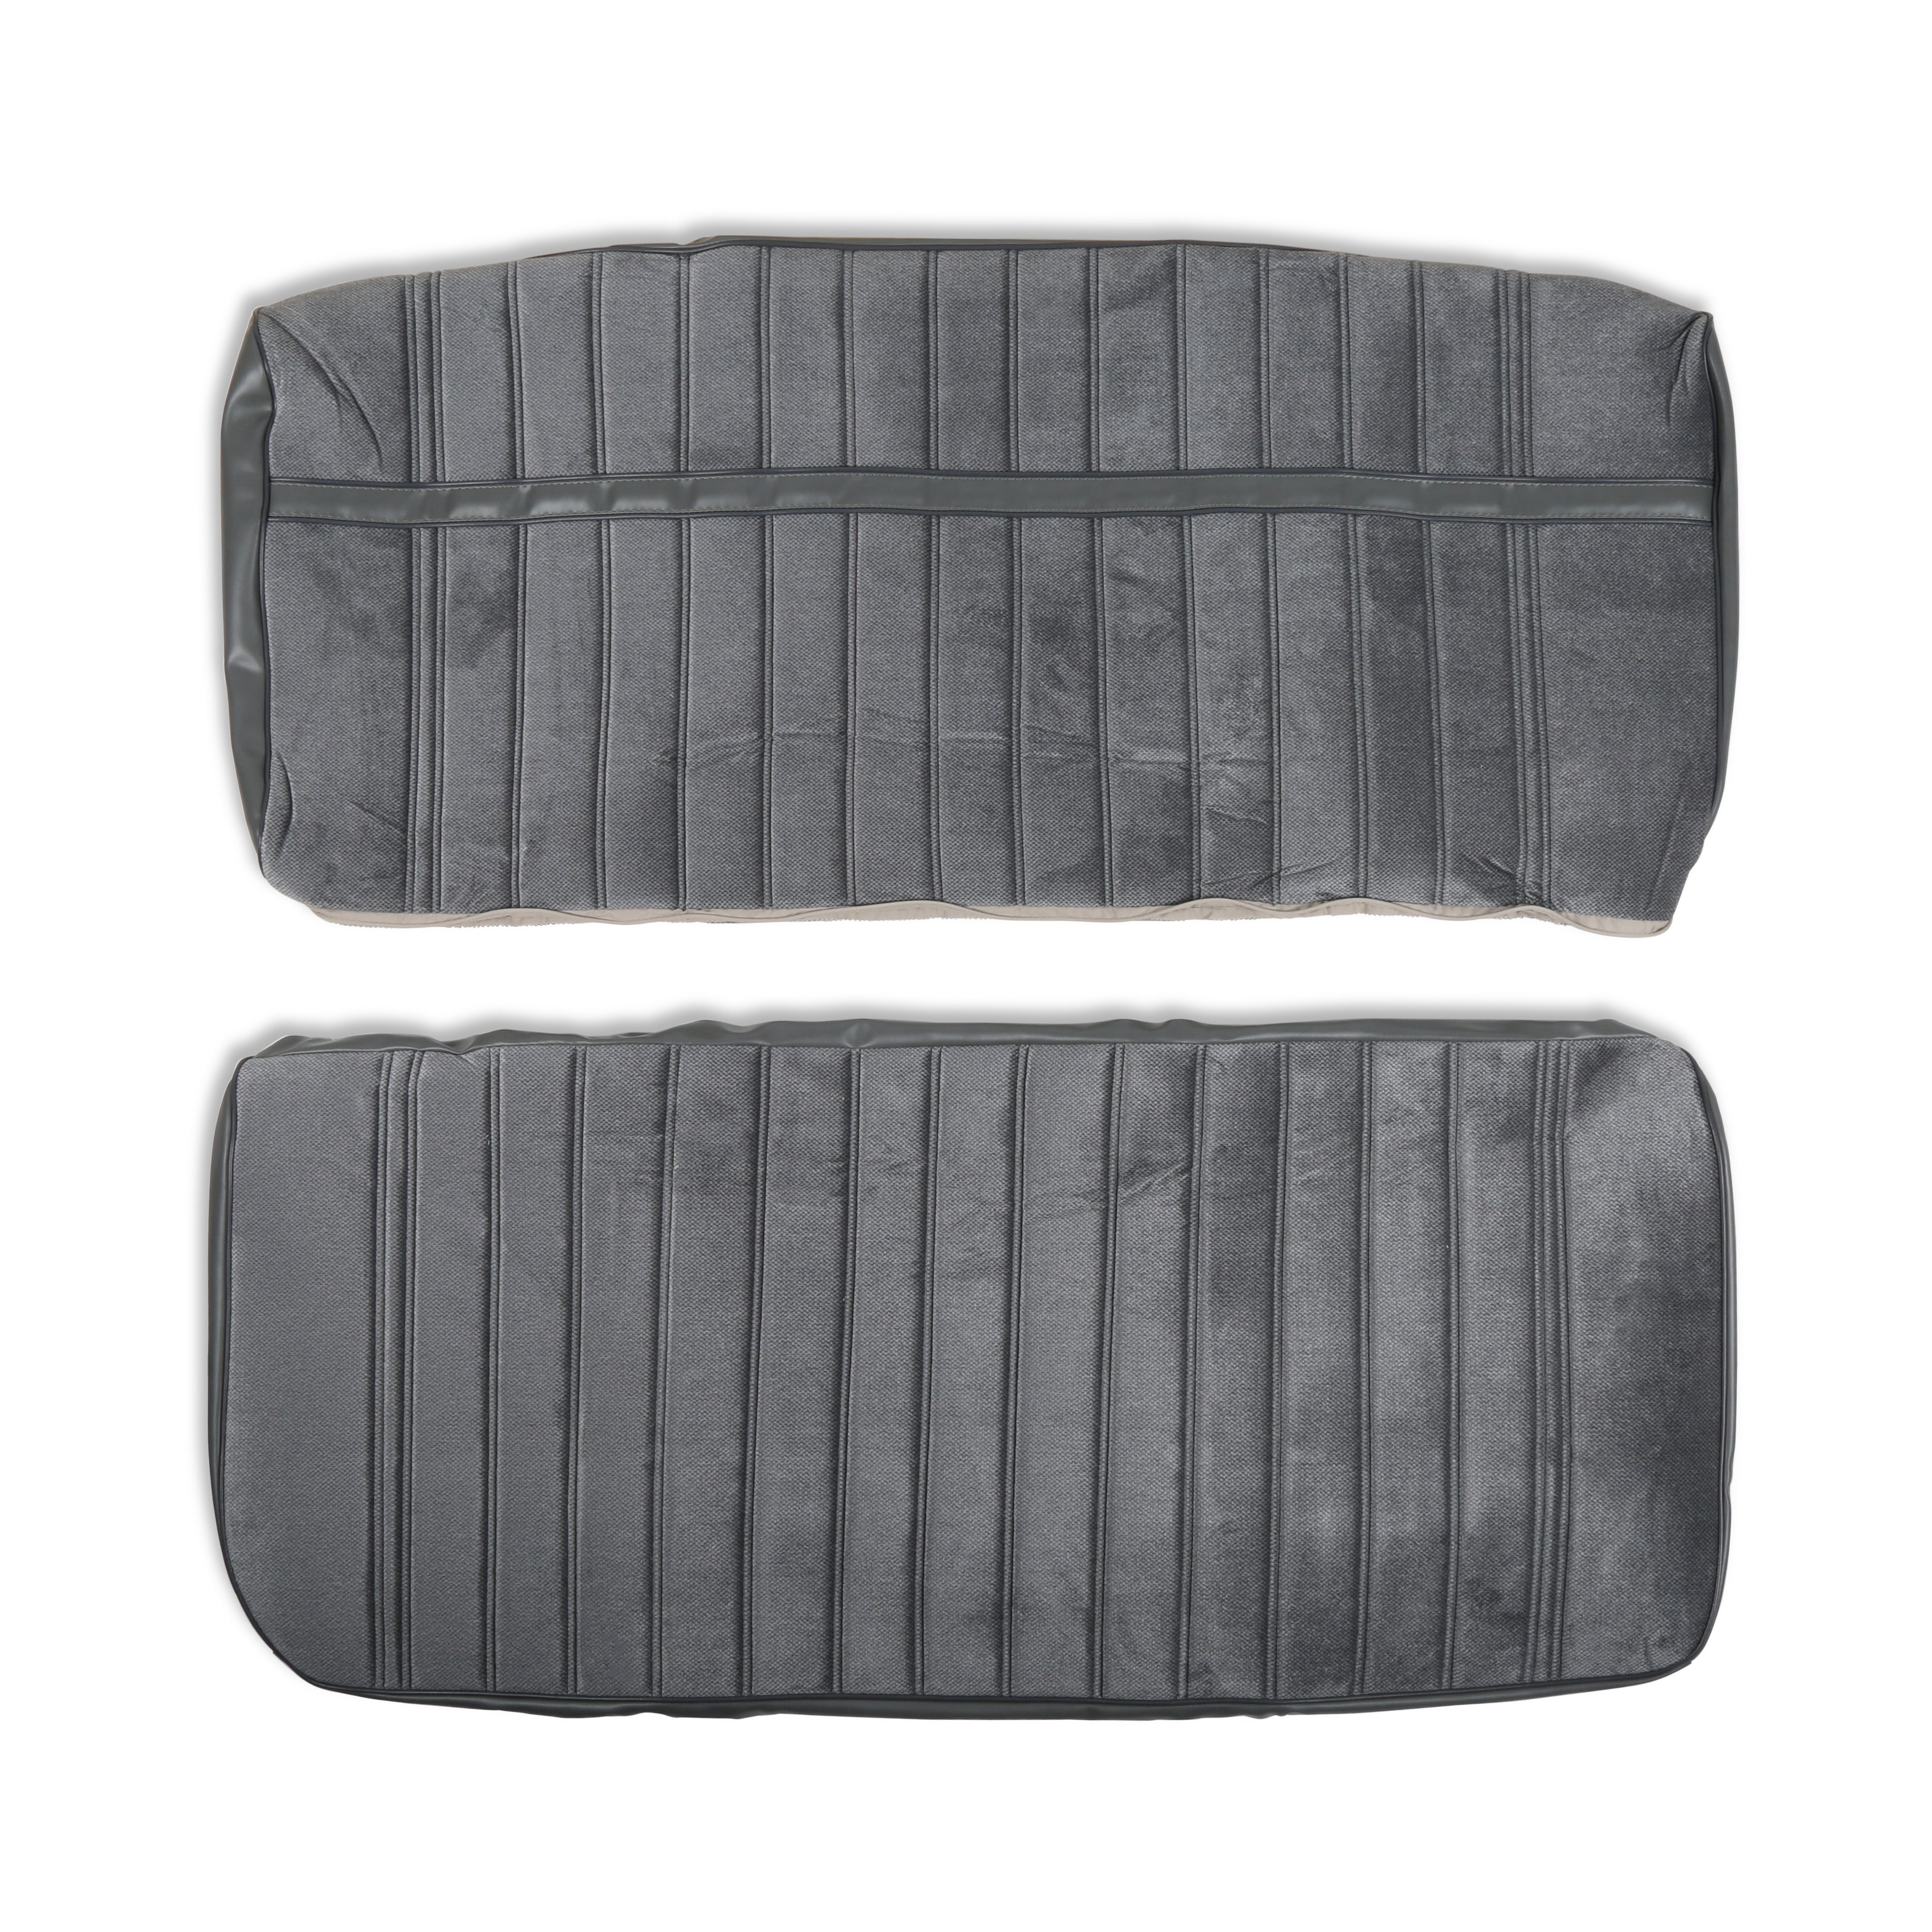 BROTHERS C/K Seat Upholstery Kit - Cloth/Vinyl - Grey/Charcoal pn 05-294